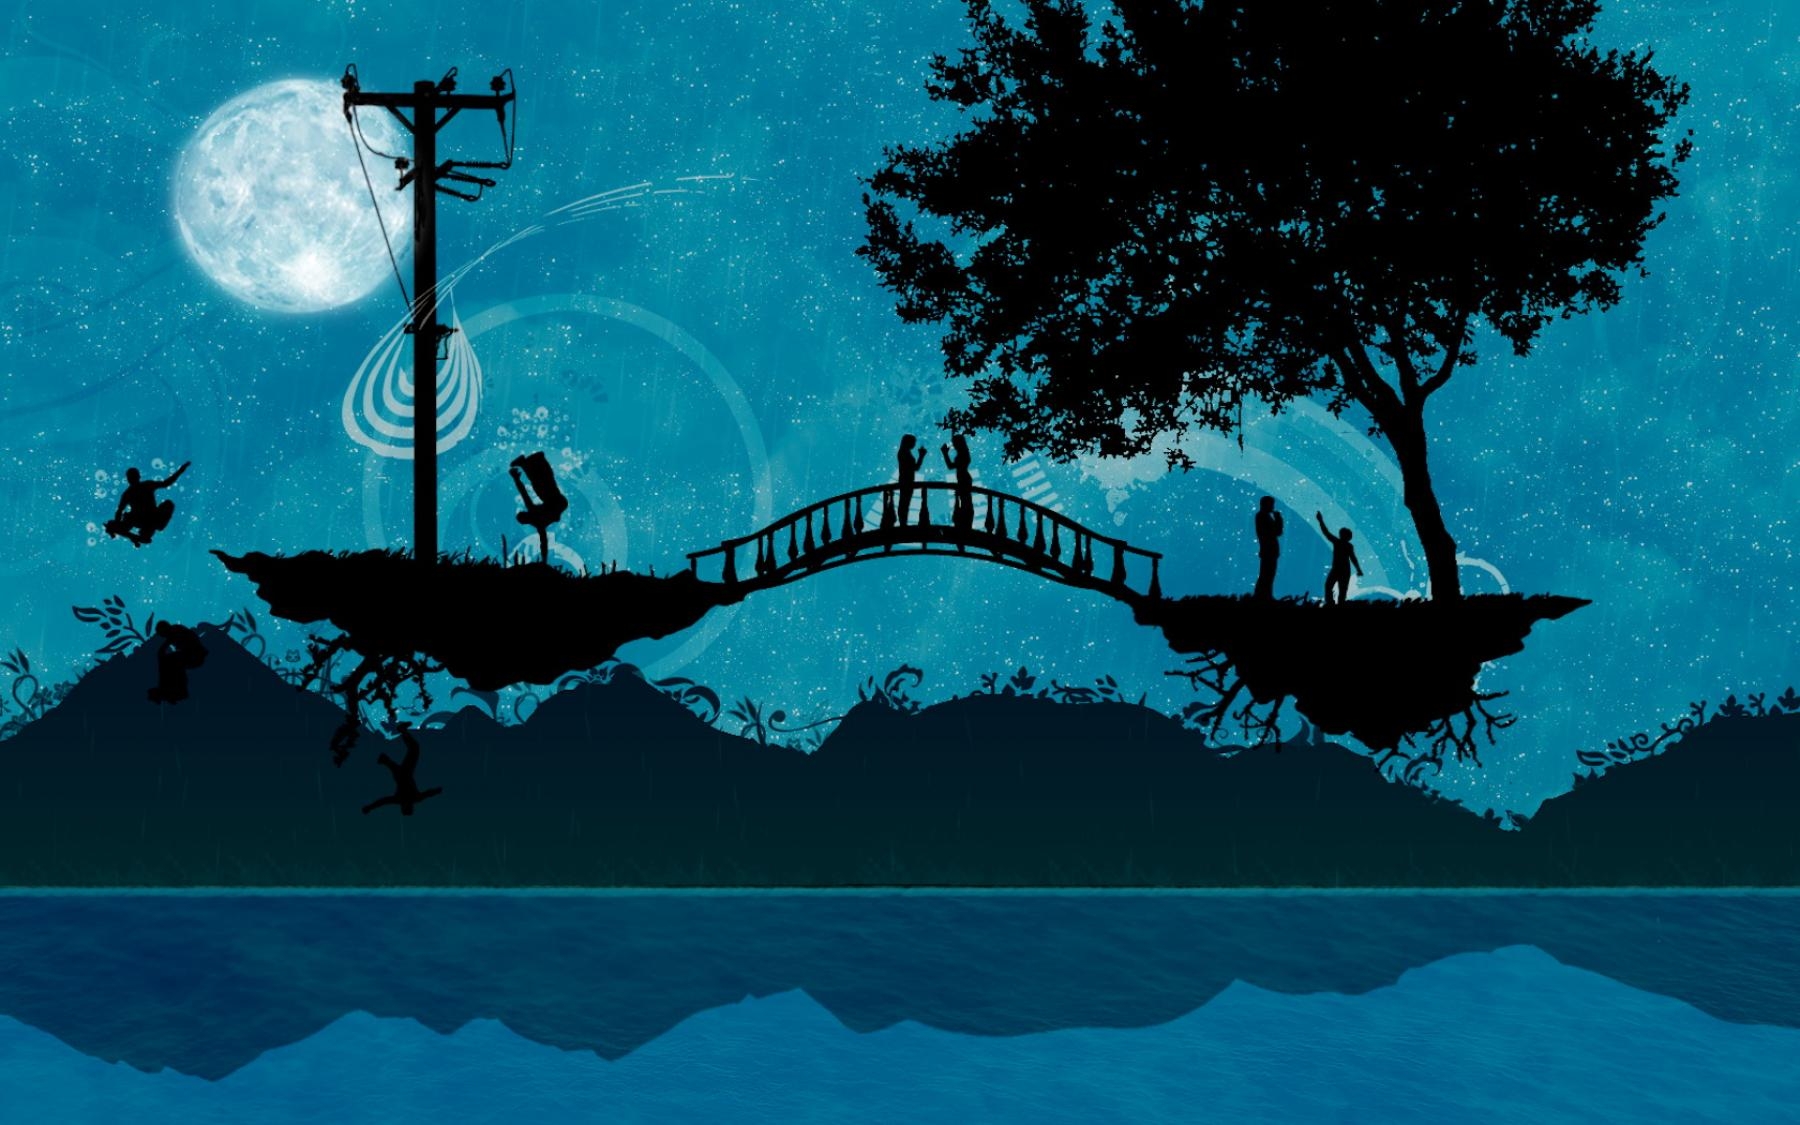 android sea, people, trees, vector, silhouettes, bridge, romance, wires, wire, islands, islets